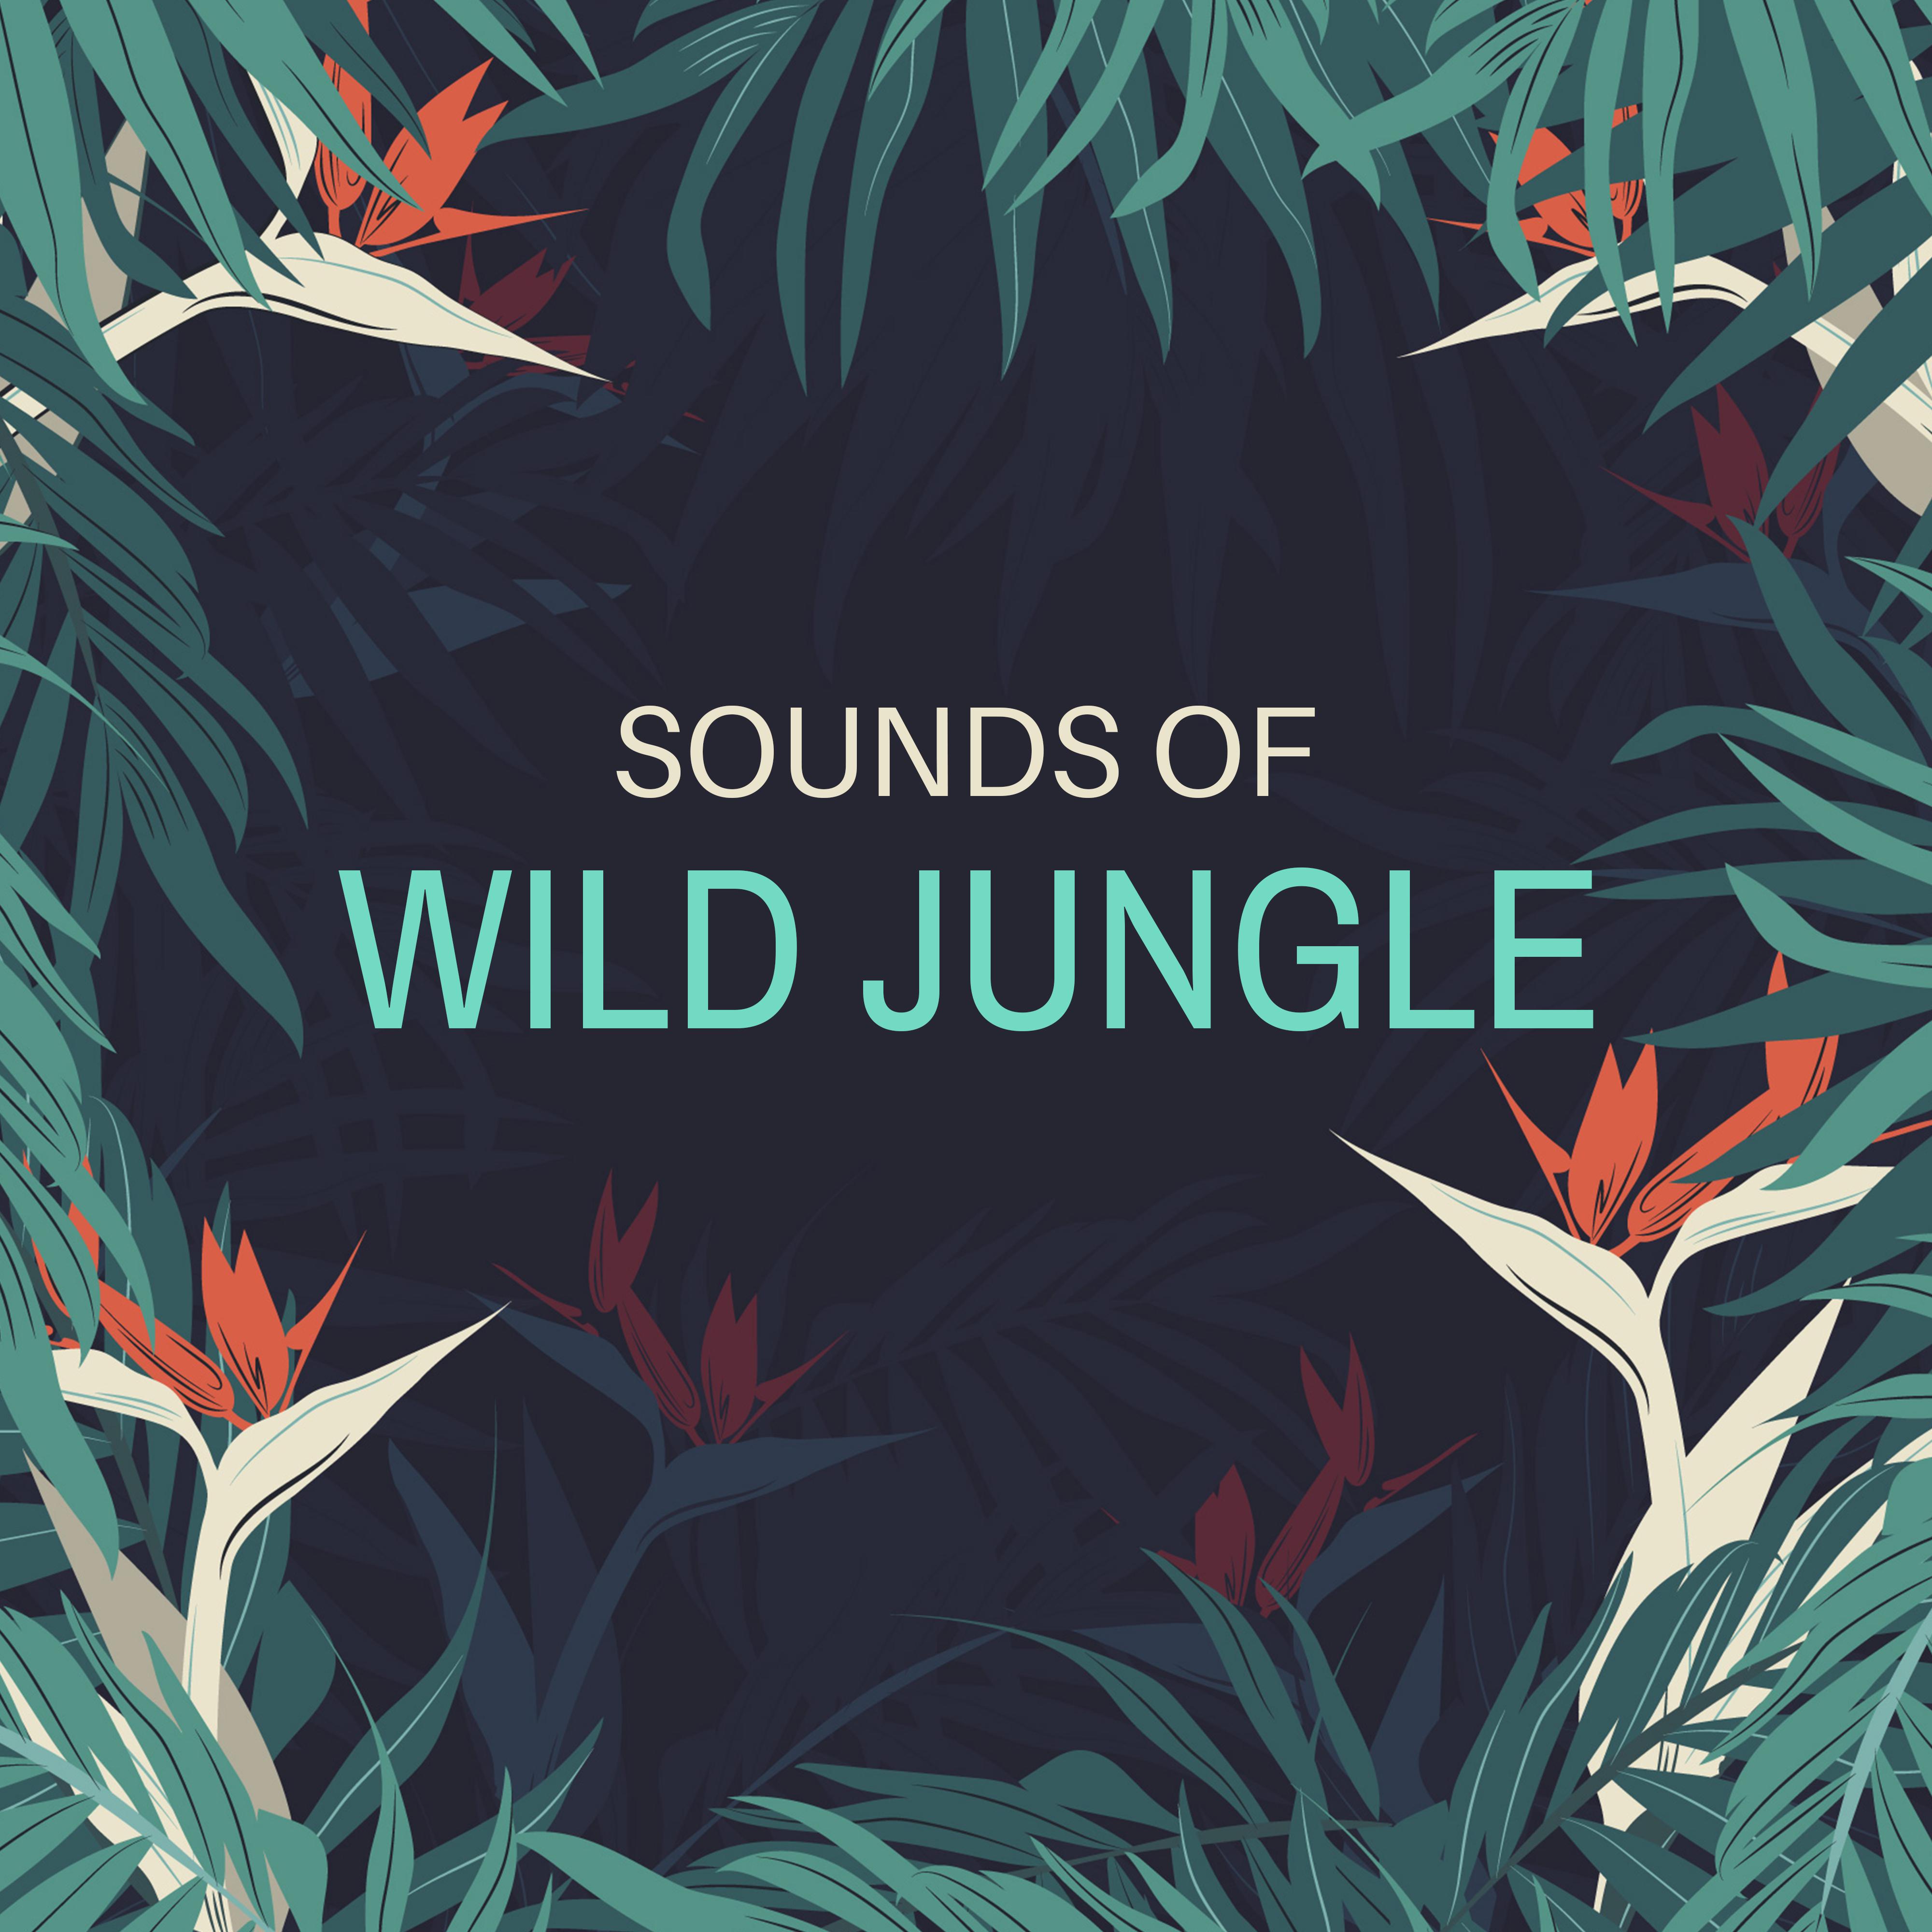 Sounds of Wild Jungle